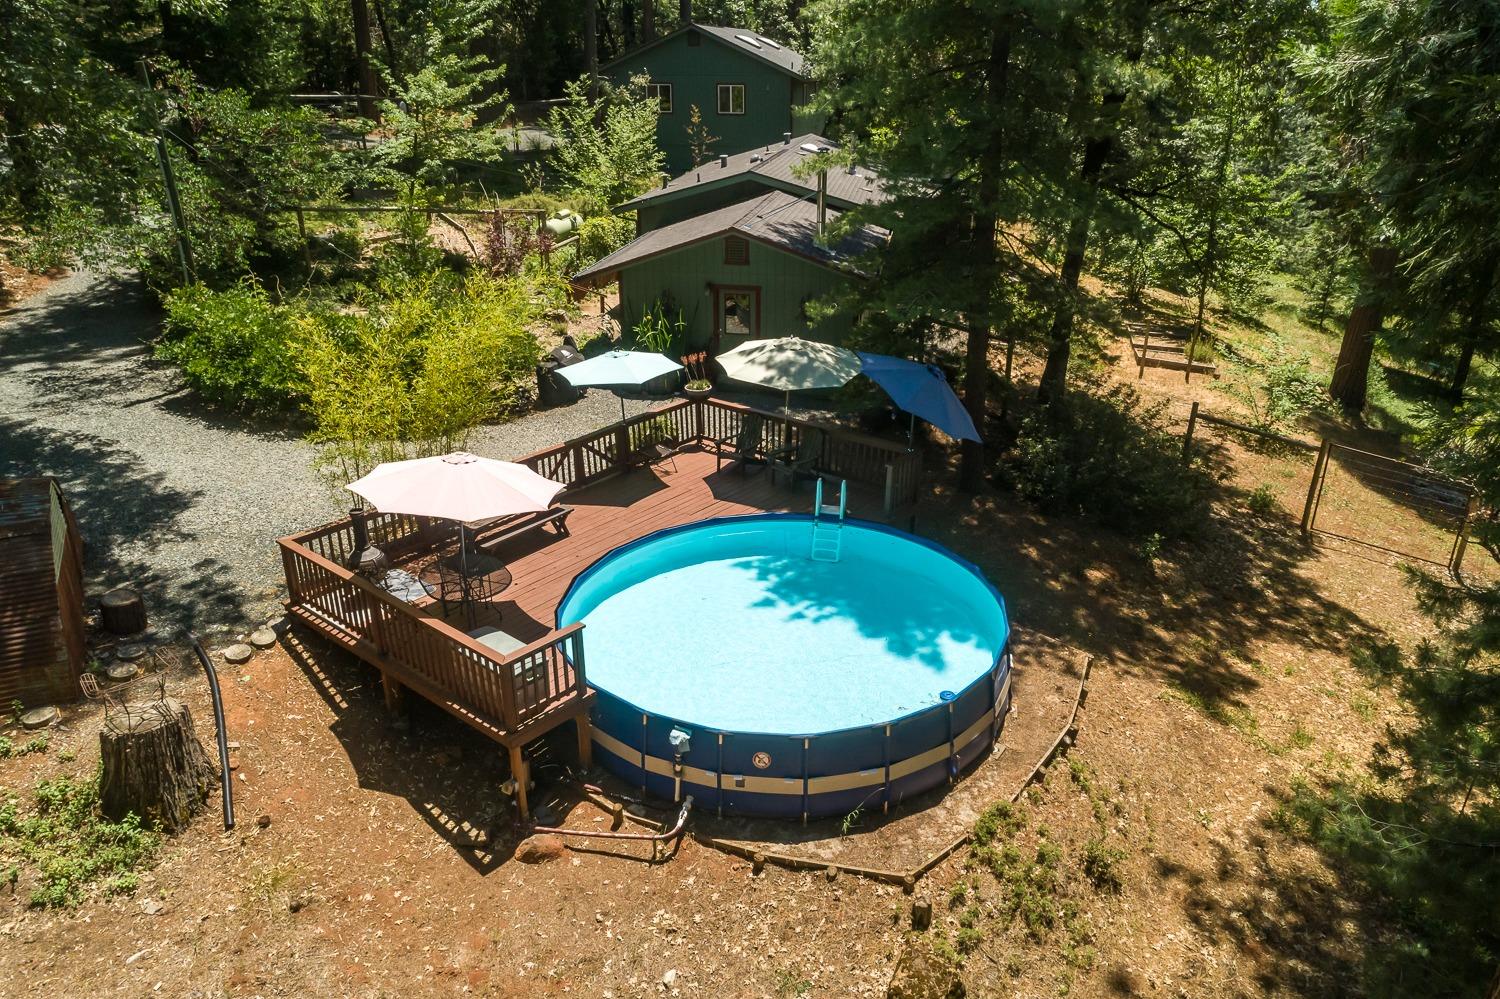 Photo of 15090 Chinook Ln in Grass Valley, CA